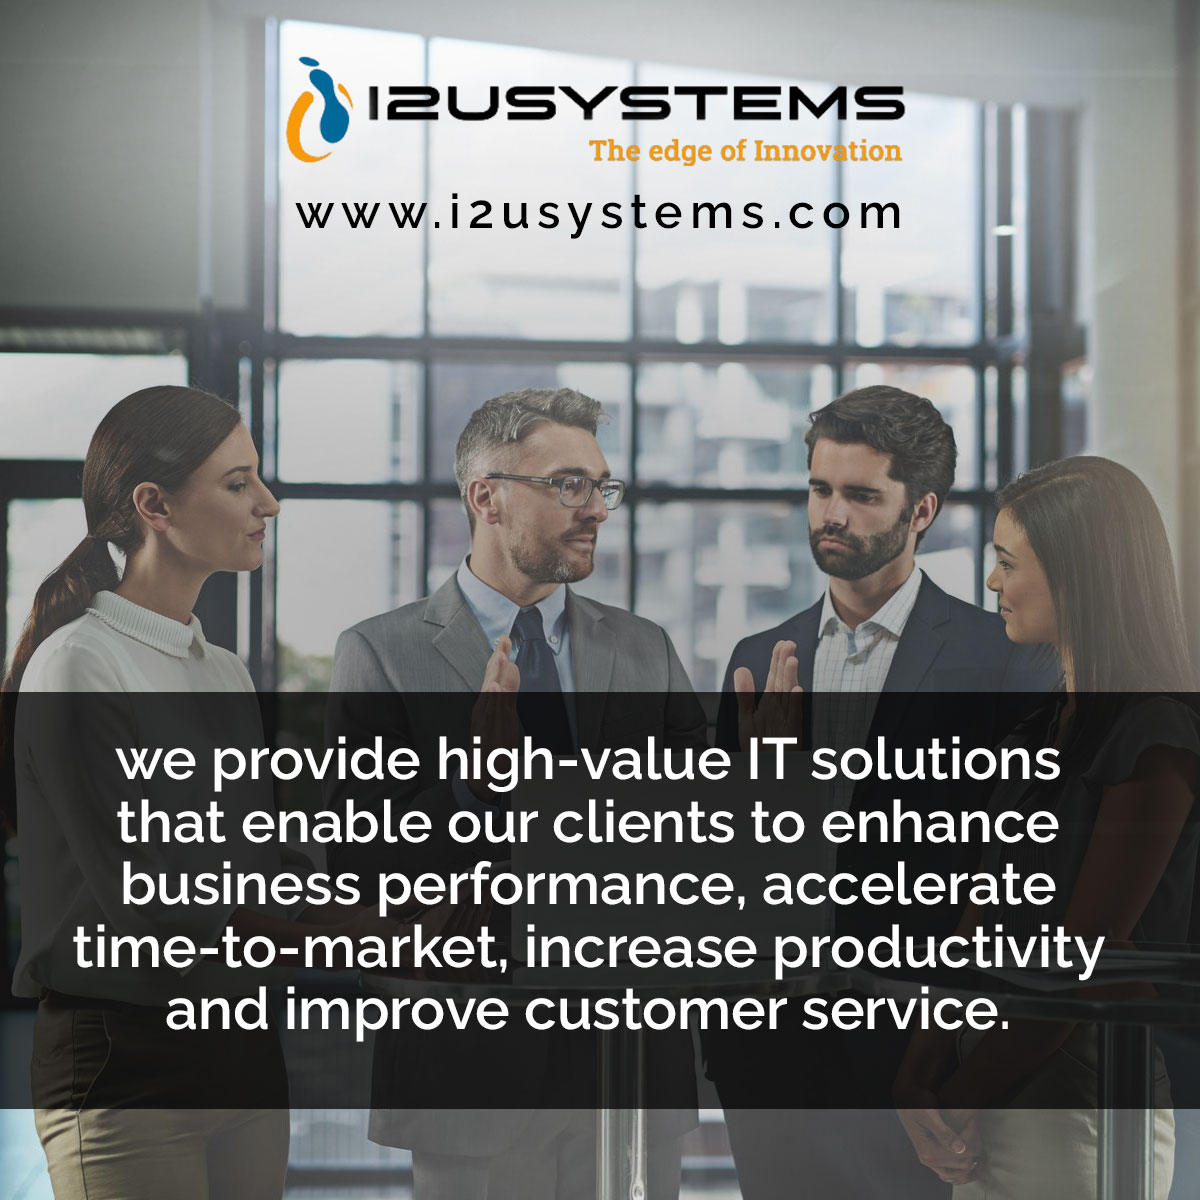 we provide high-value IT solutions that enable our clients to enhance business performance, accelerate time-to-market, increase productivity and improve customer service.

#i2usystems #c2crequirements #internetofthings #itsolutions #business #market #productivity #customerservice